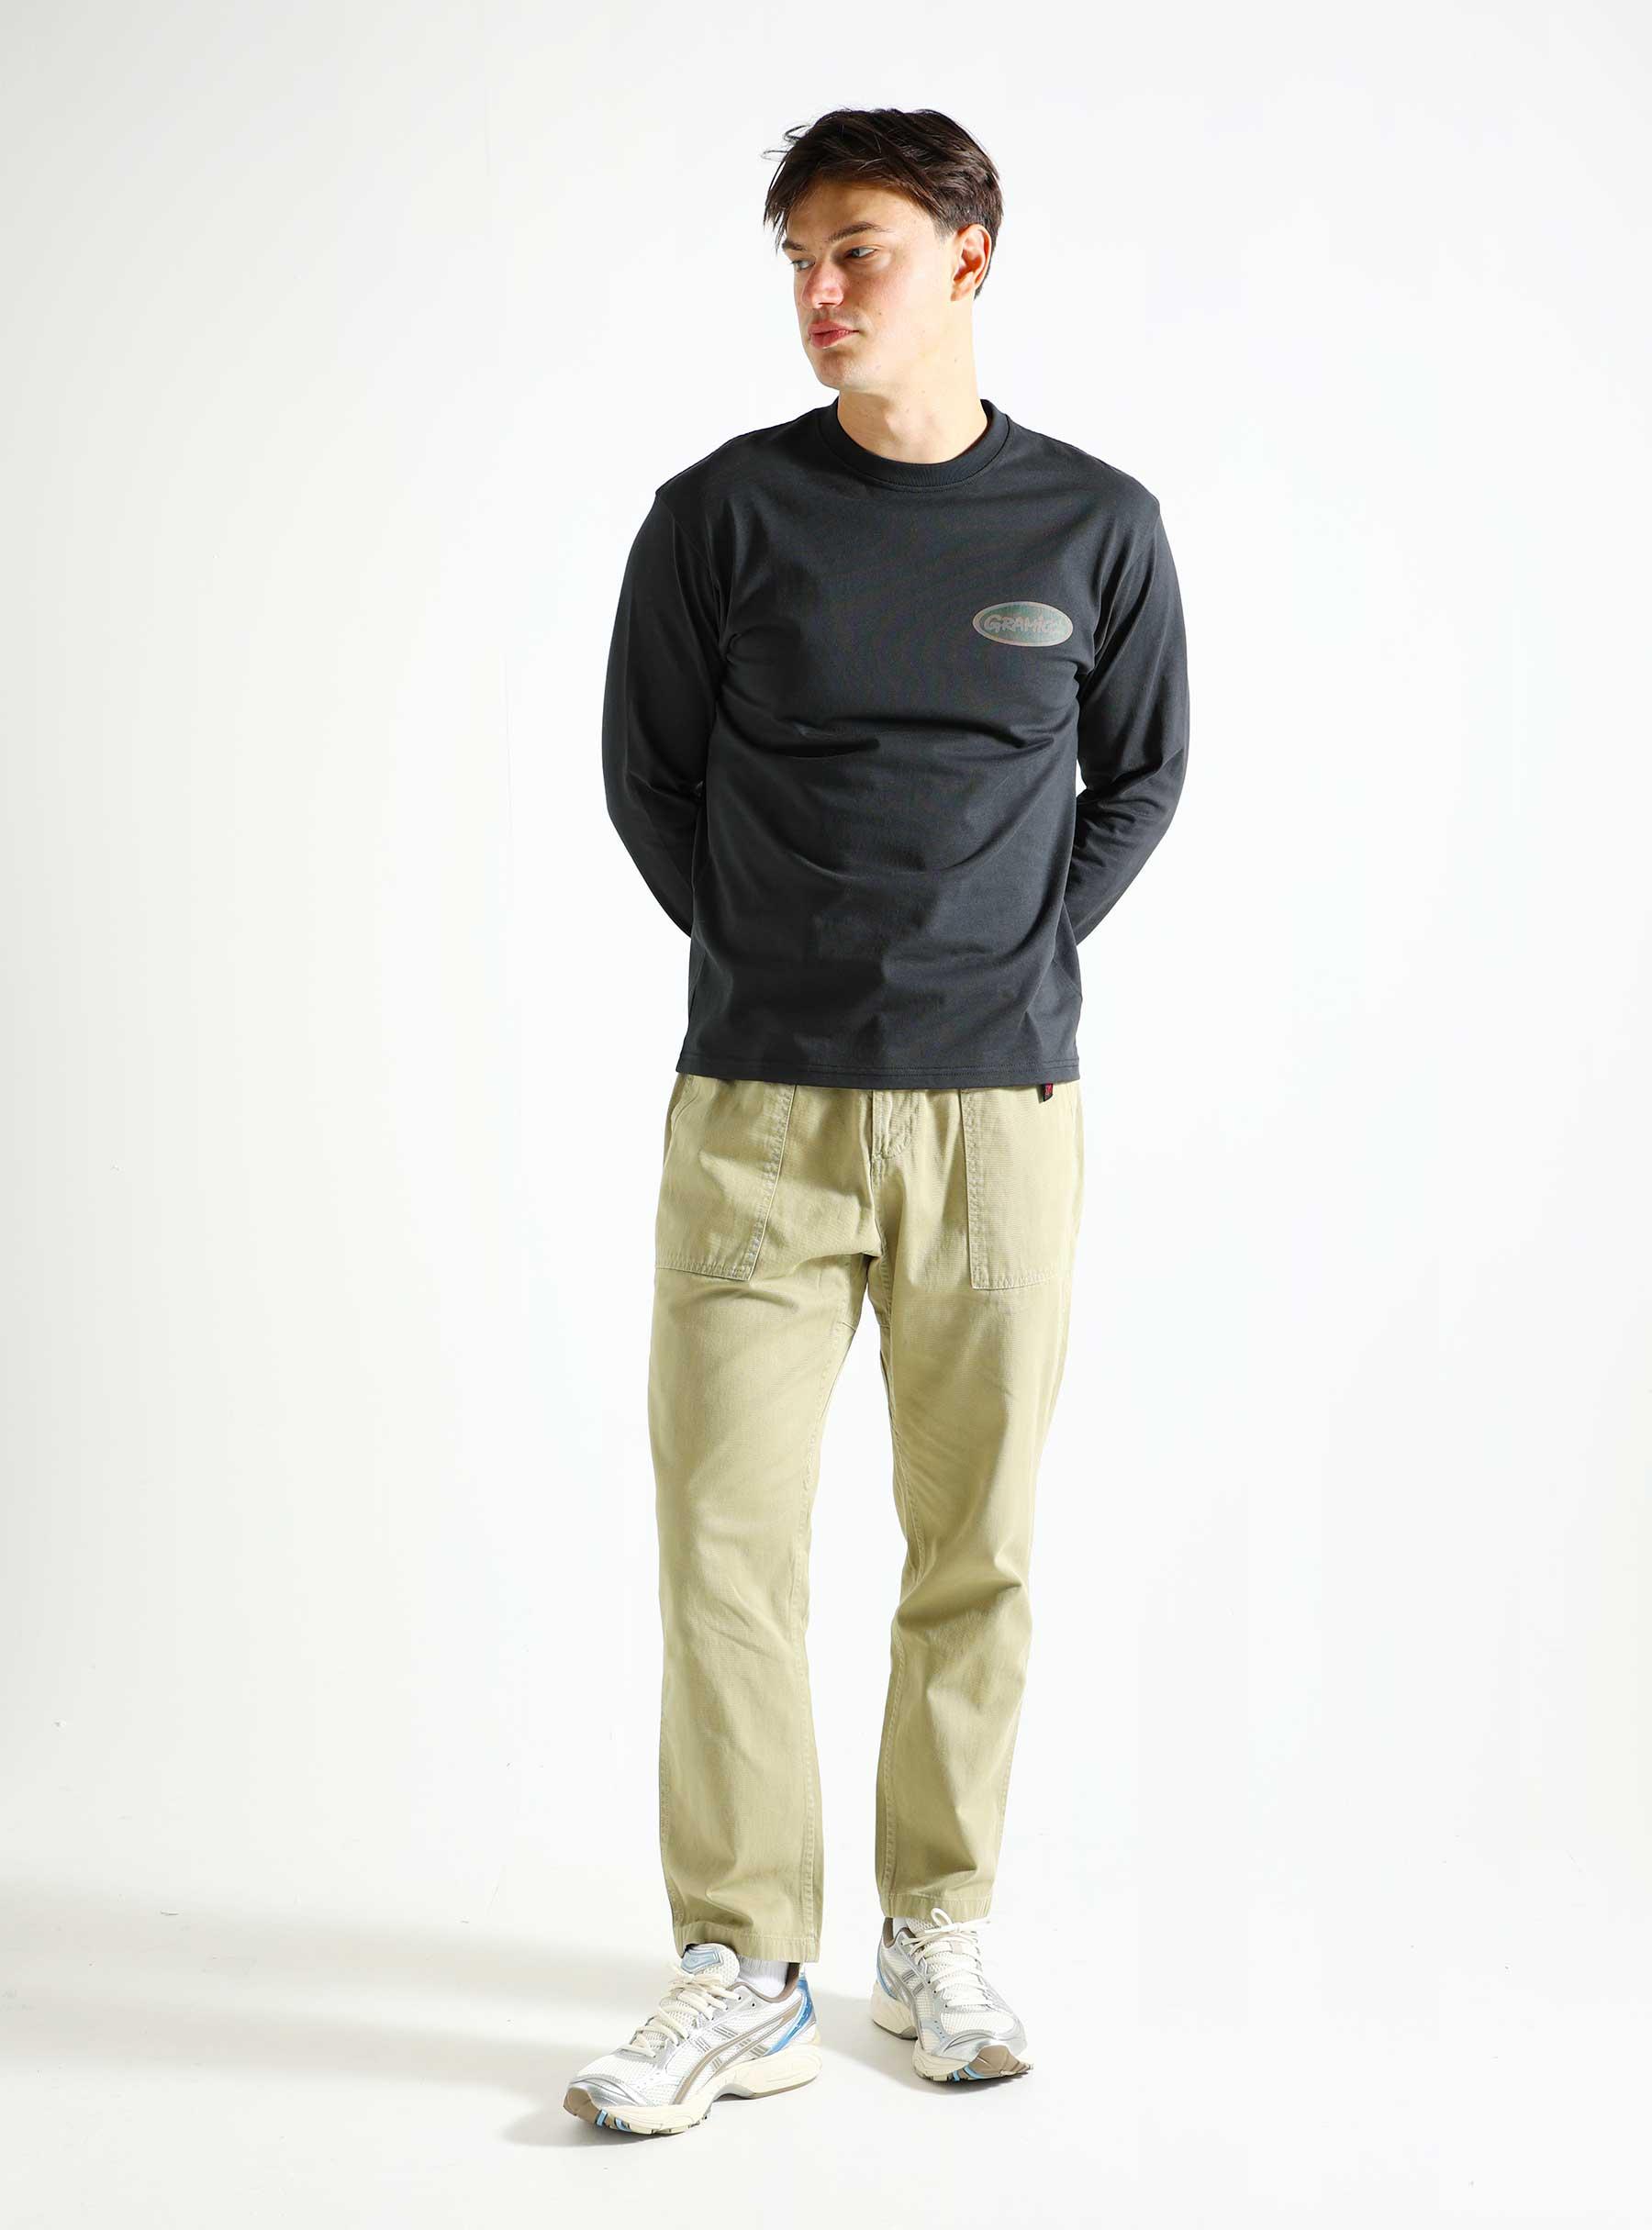 Loose Tapered Ridge Pant Faded Olive G114-OGT-25947600